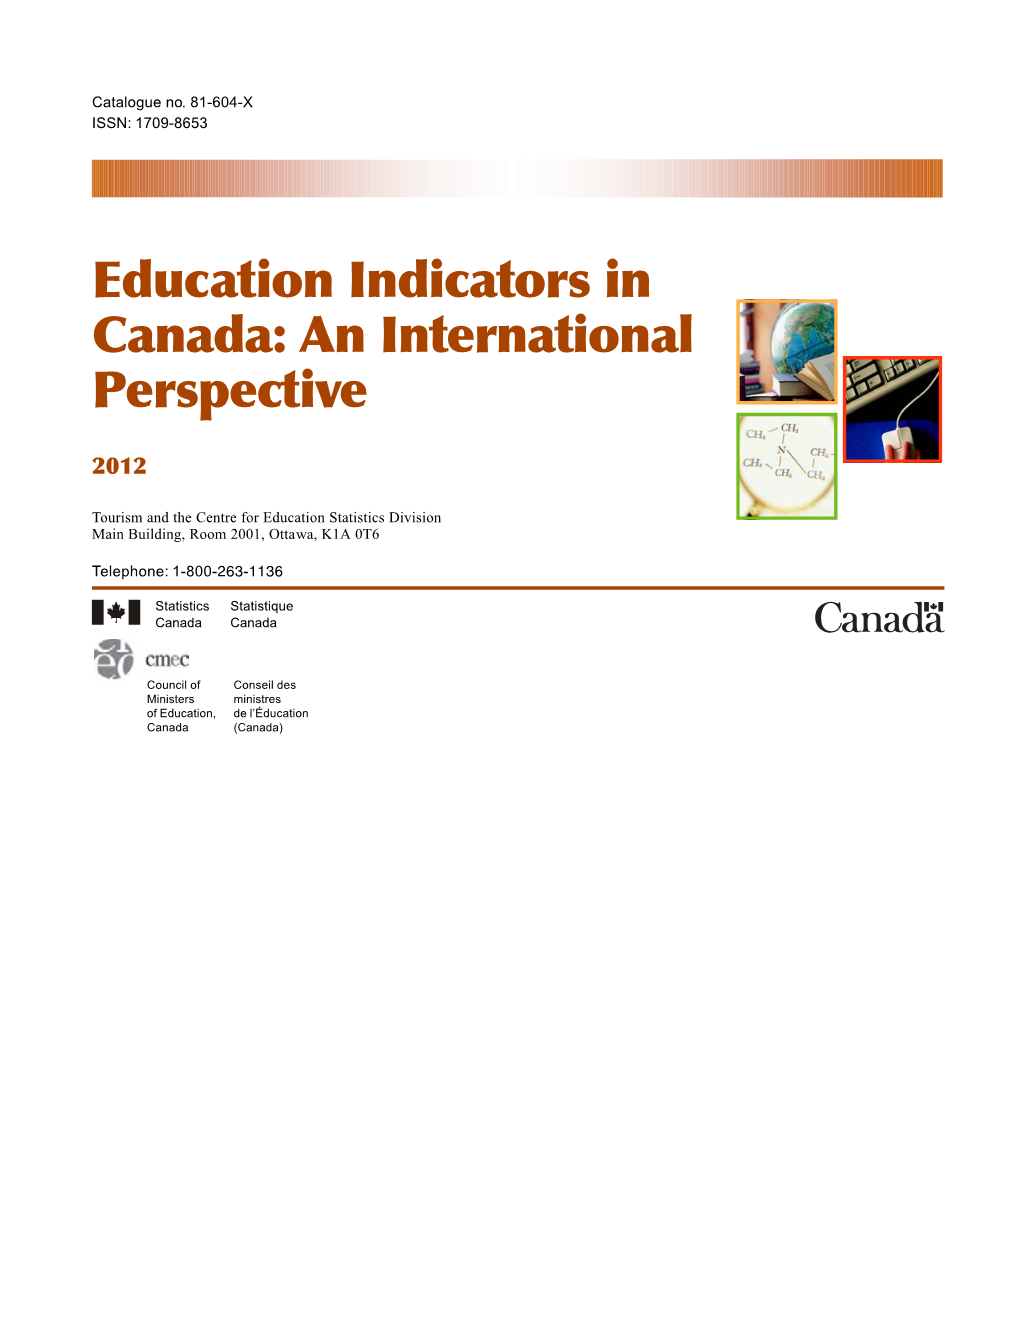 Education Indicators in Canada: an International Perspective